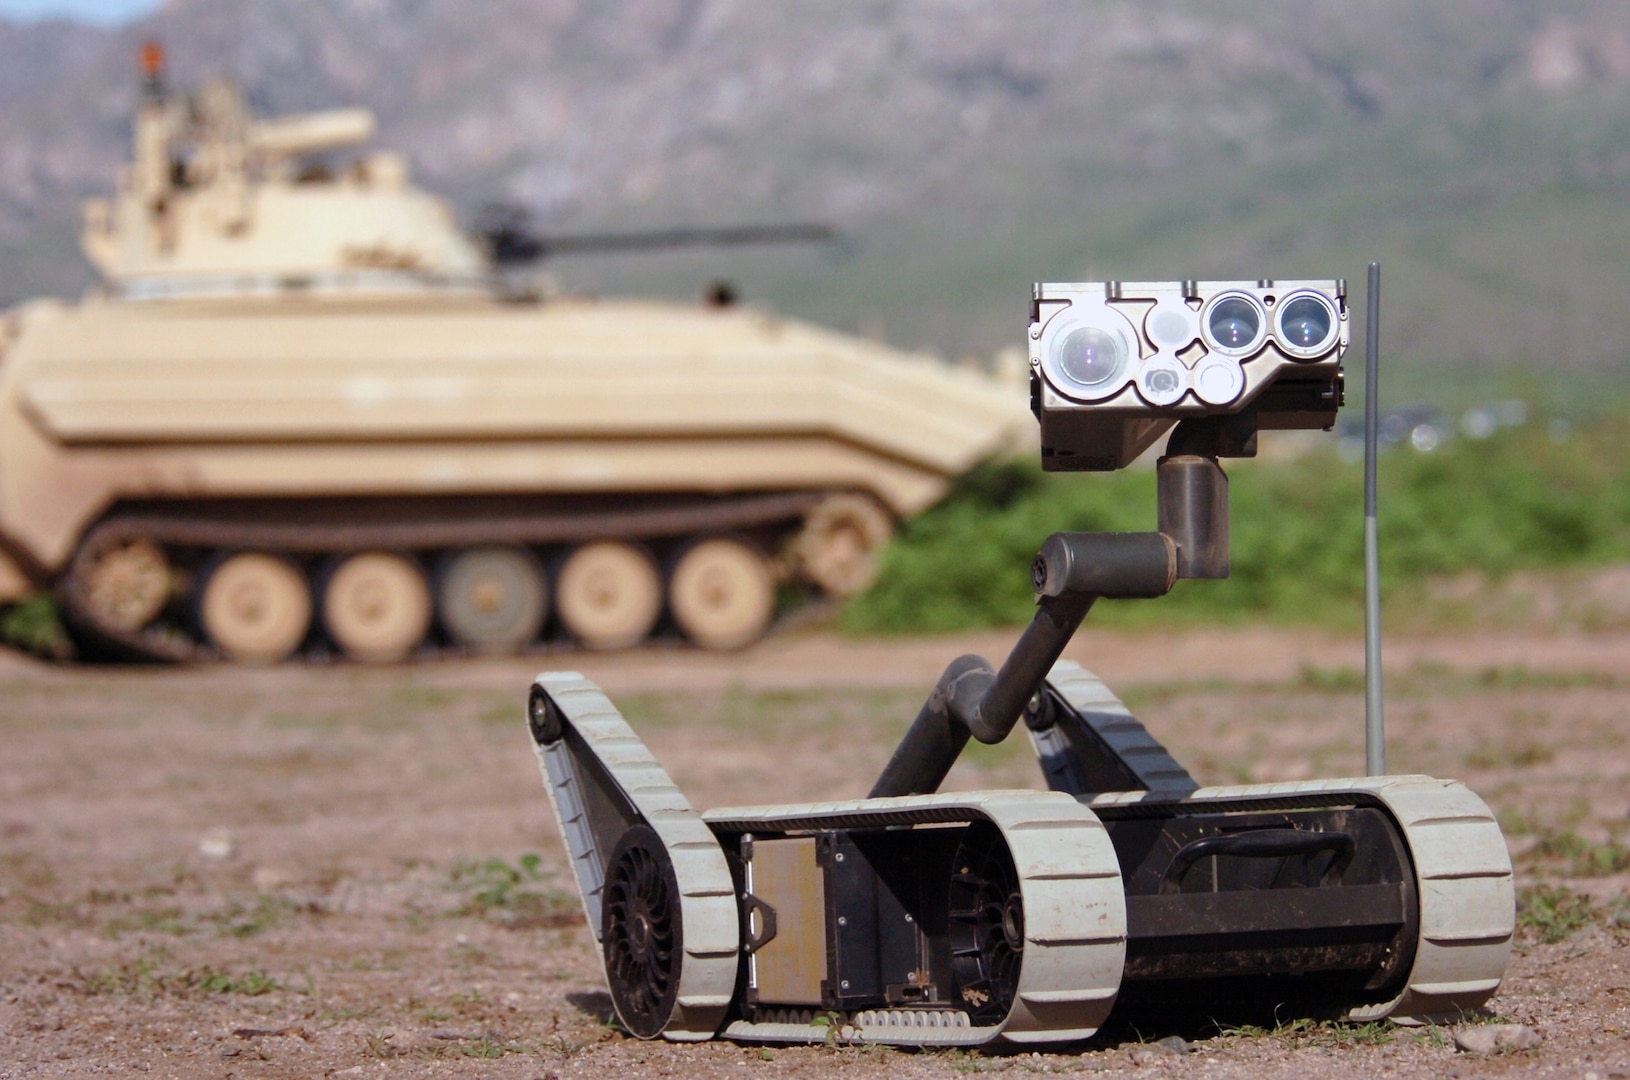 Armed combat robot operates beyond line of sight